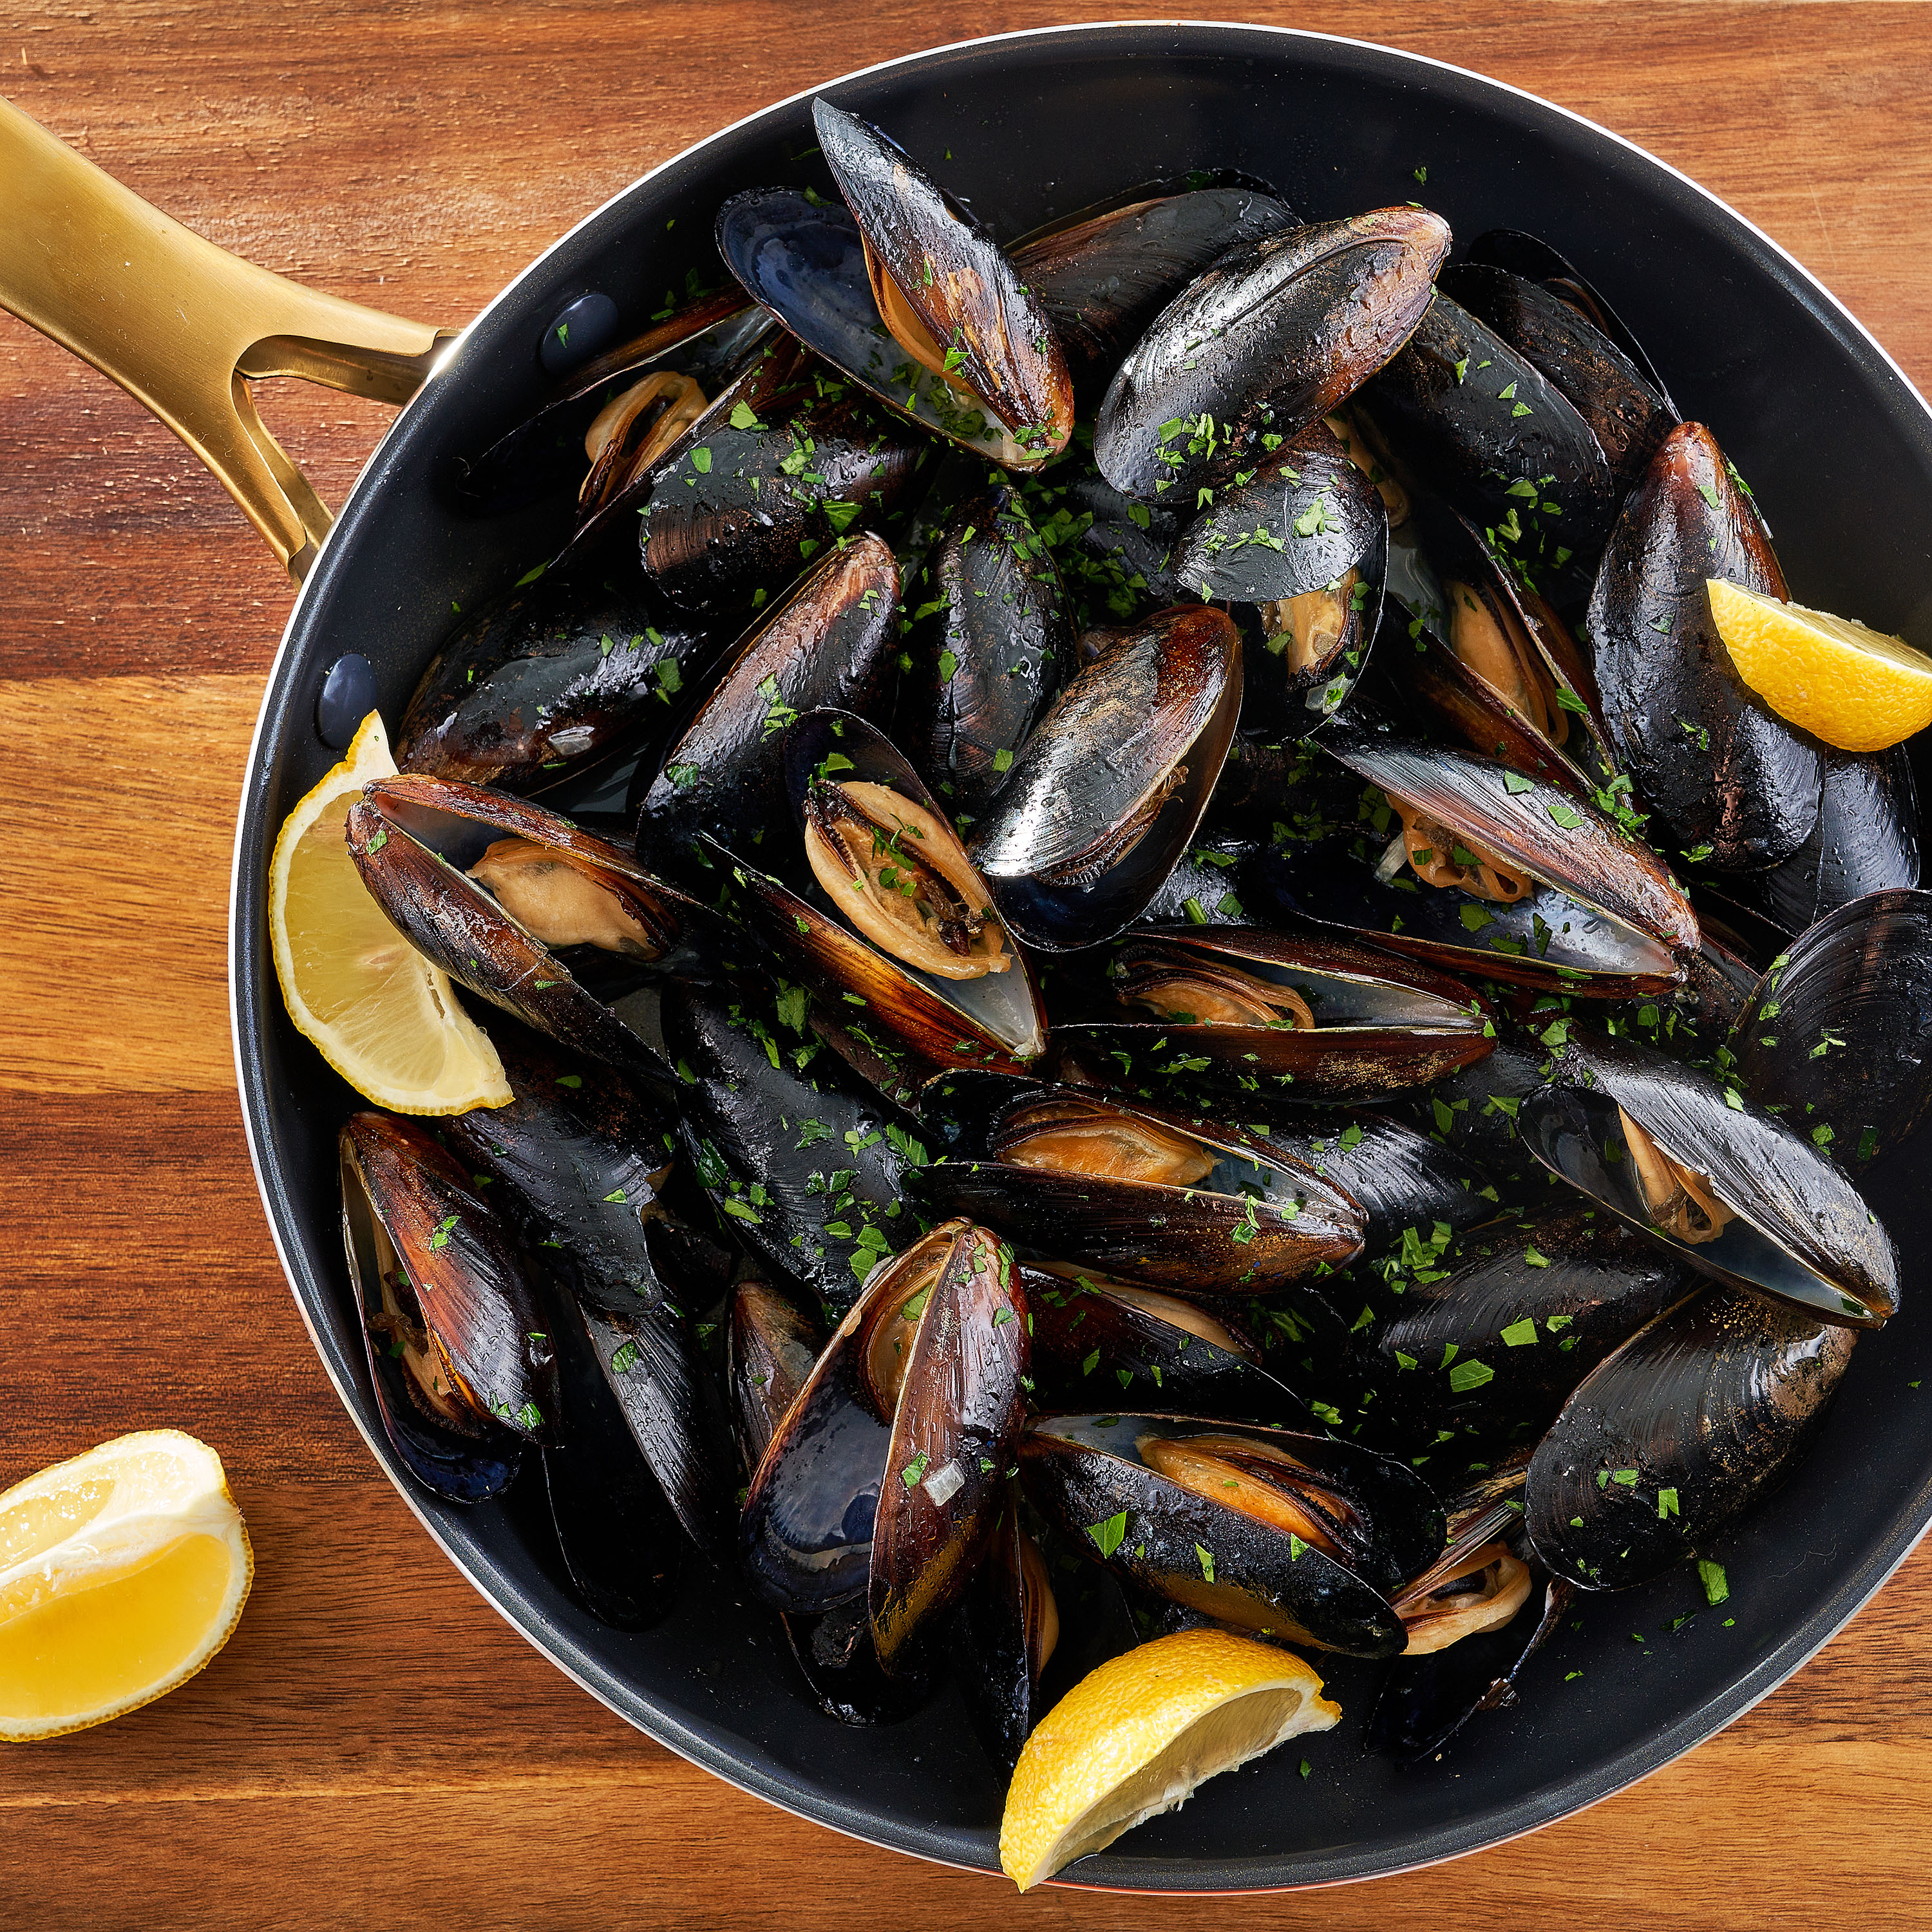 Sams Choice Frozen Mussels 2lb - image 1 of 9